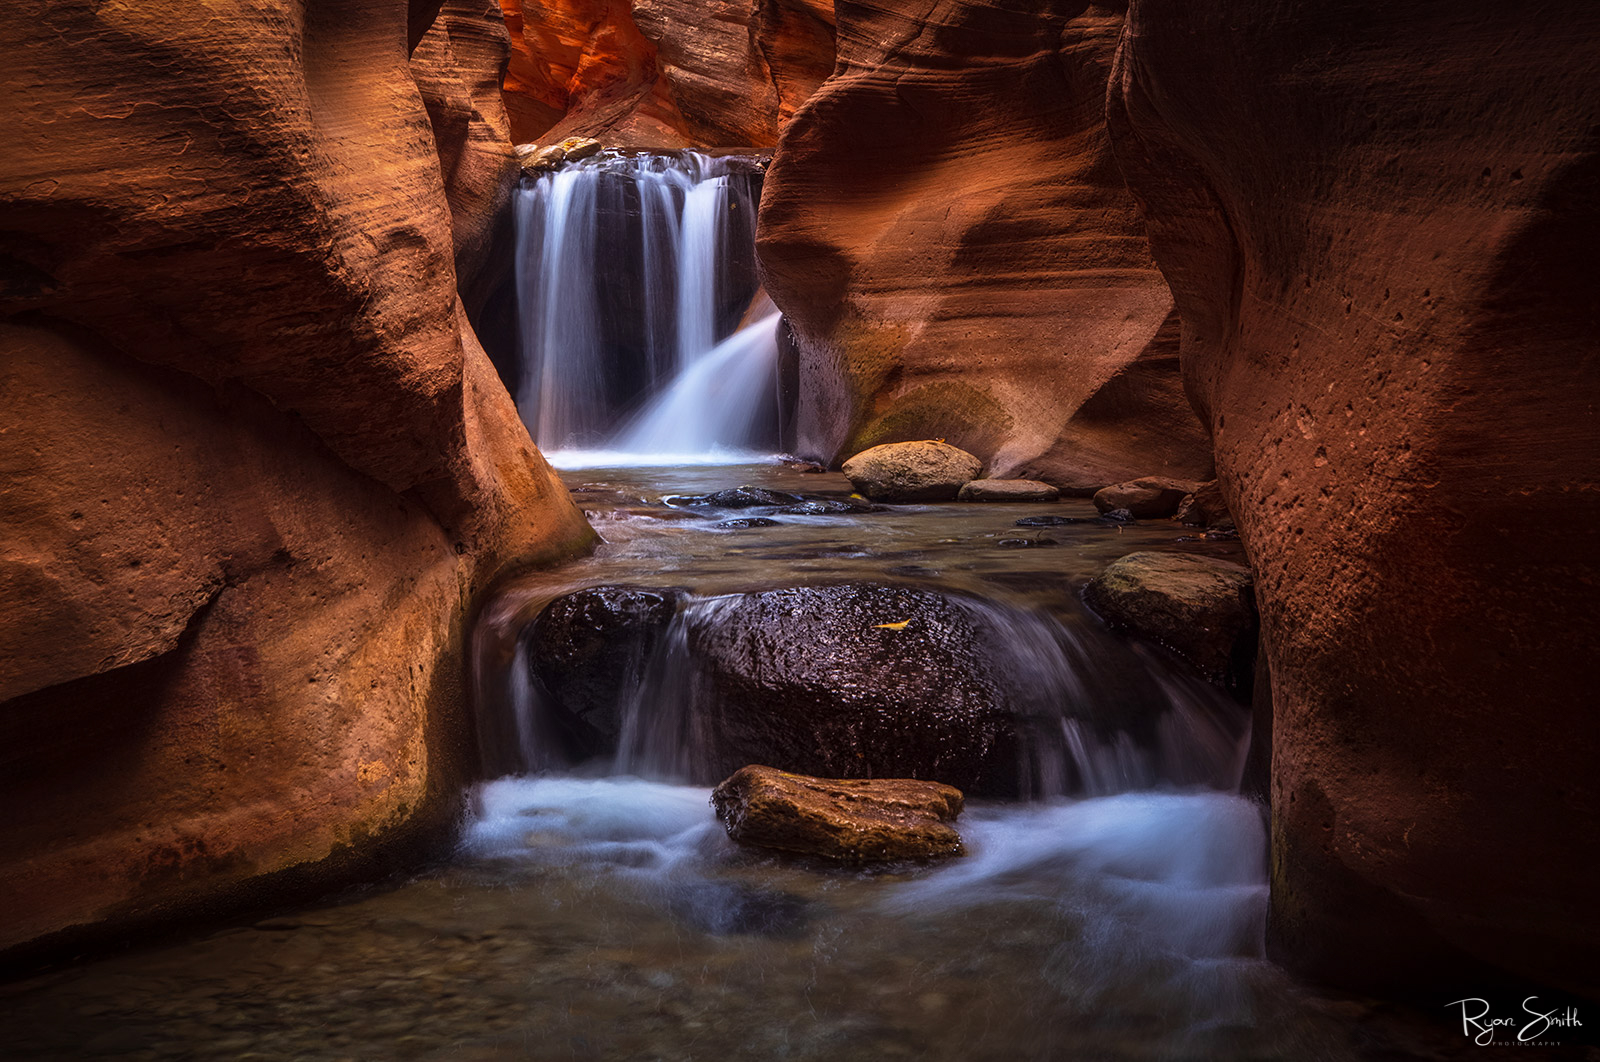 A waterfall in a sandstone slot canyon with reddish-orange walls and two levels of the waterfall.